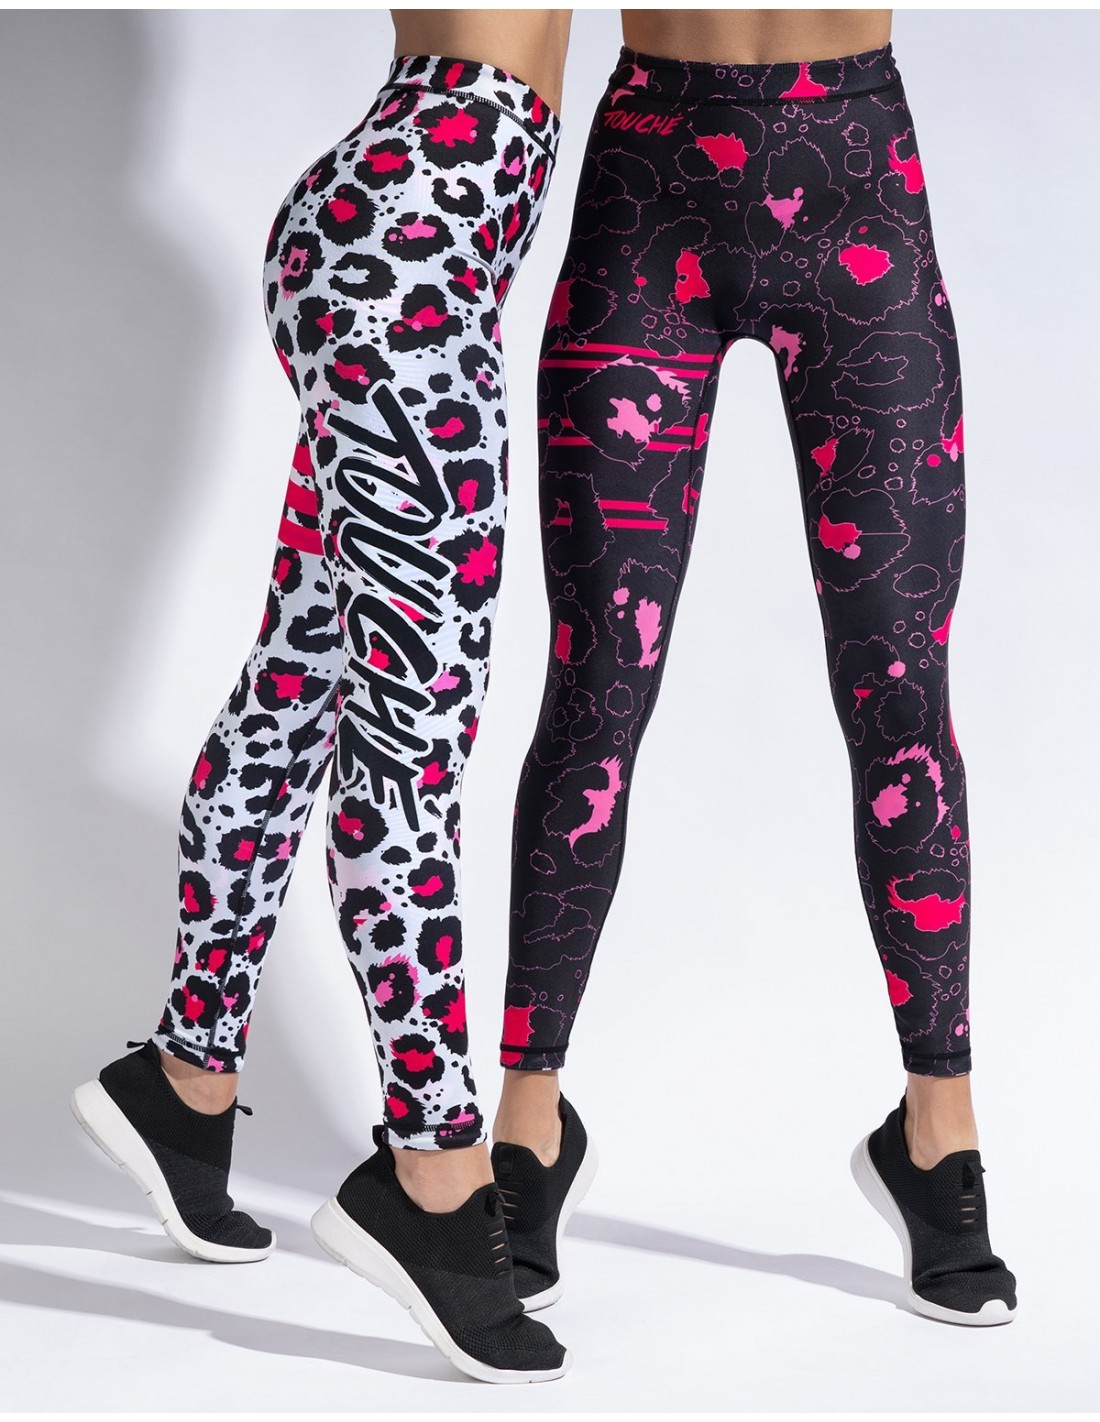 CALZA TOUCHE SPORT PINK CHEETAH REVERSIBLE MUJER RR-02